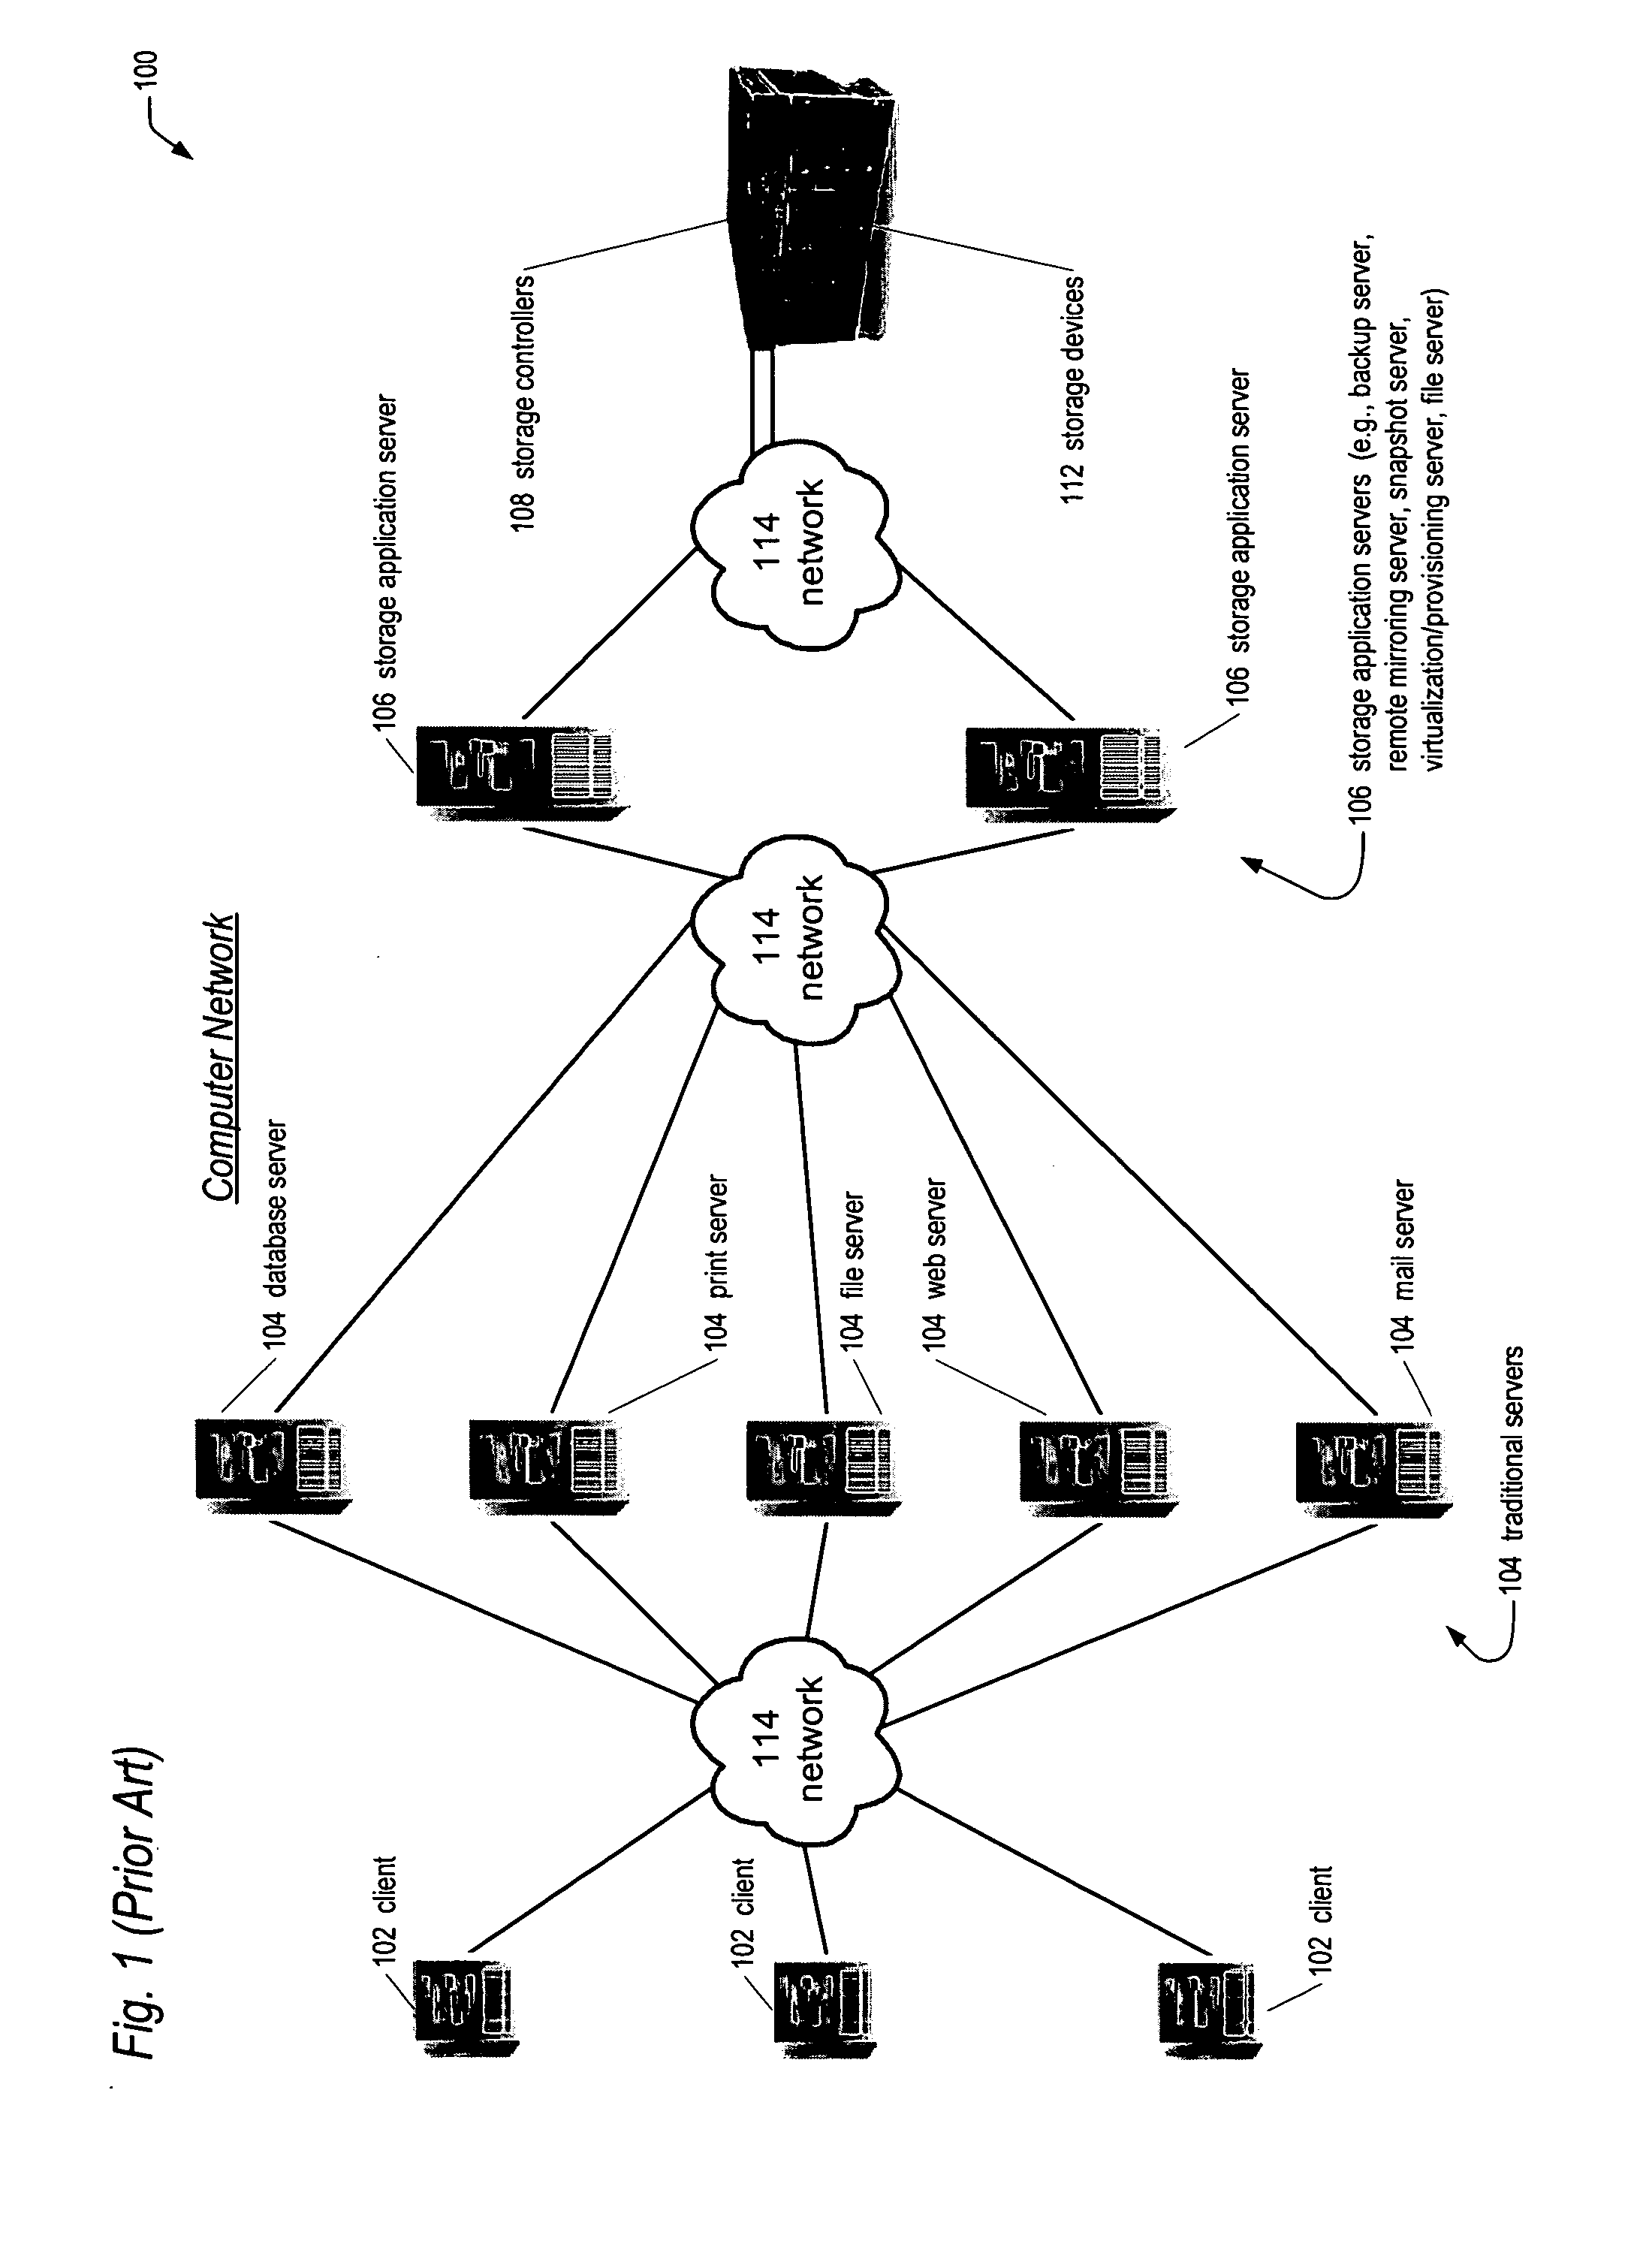 Apparatus and method for deterministically killing one of redundant servers integrated within a network storage appliance chassis